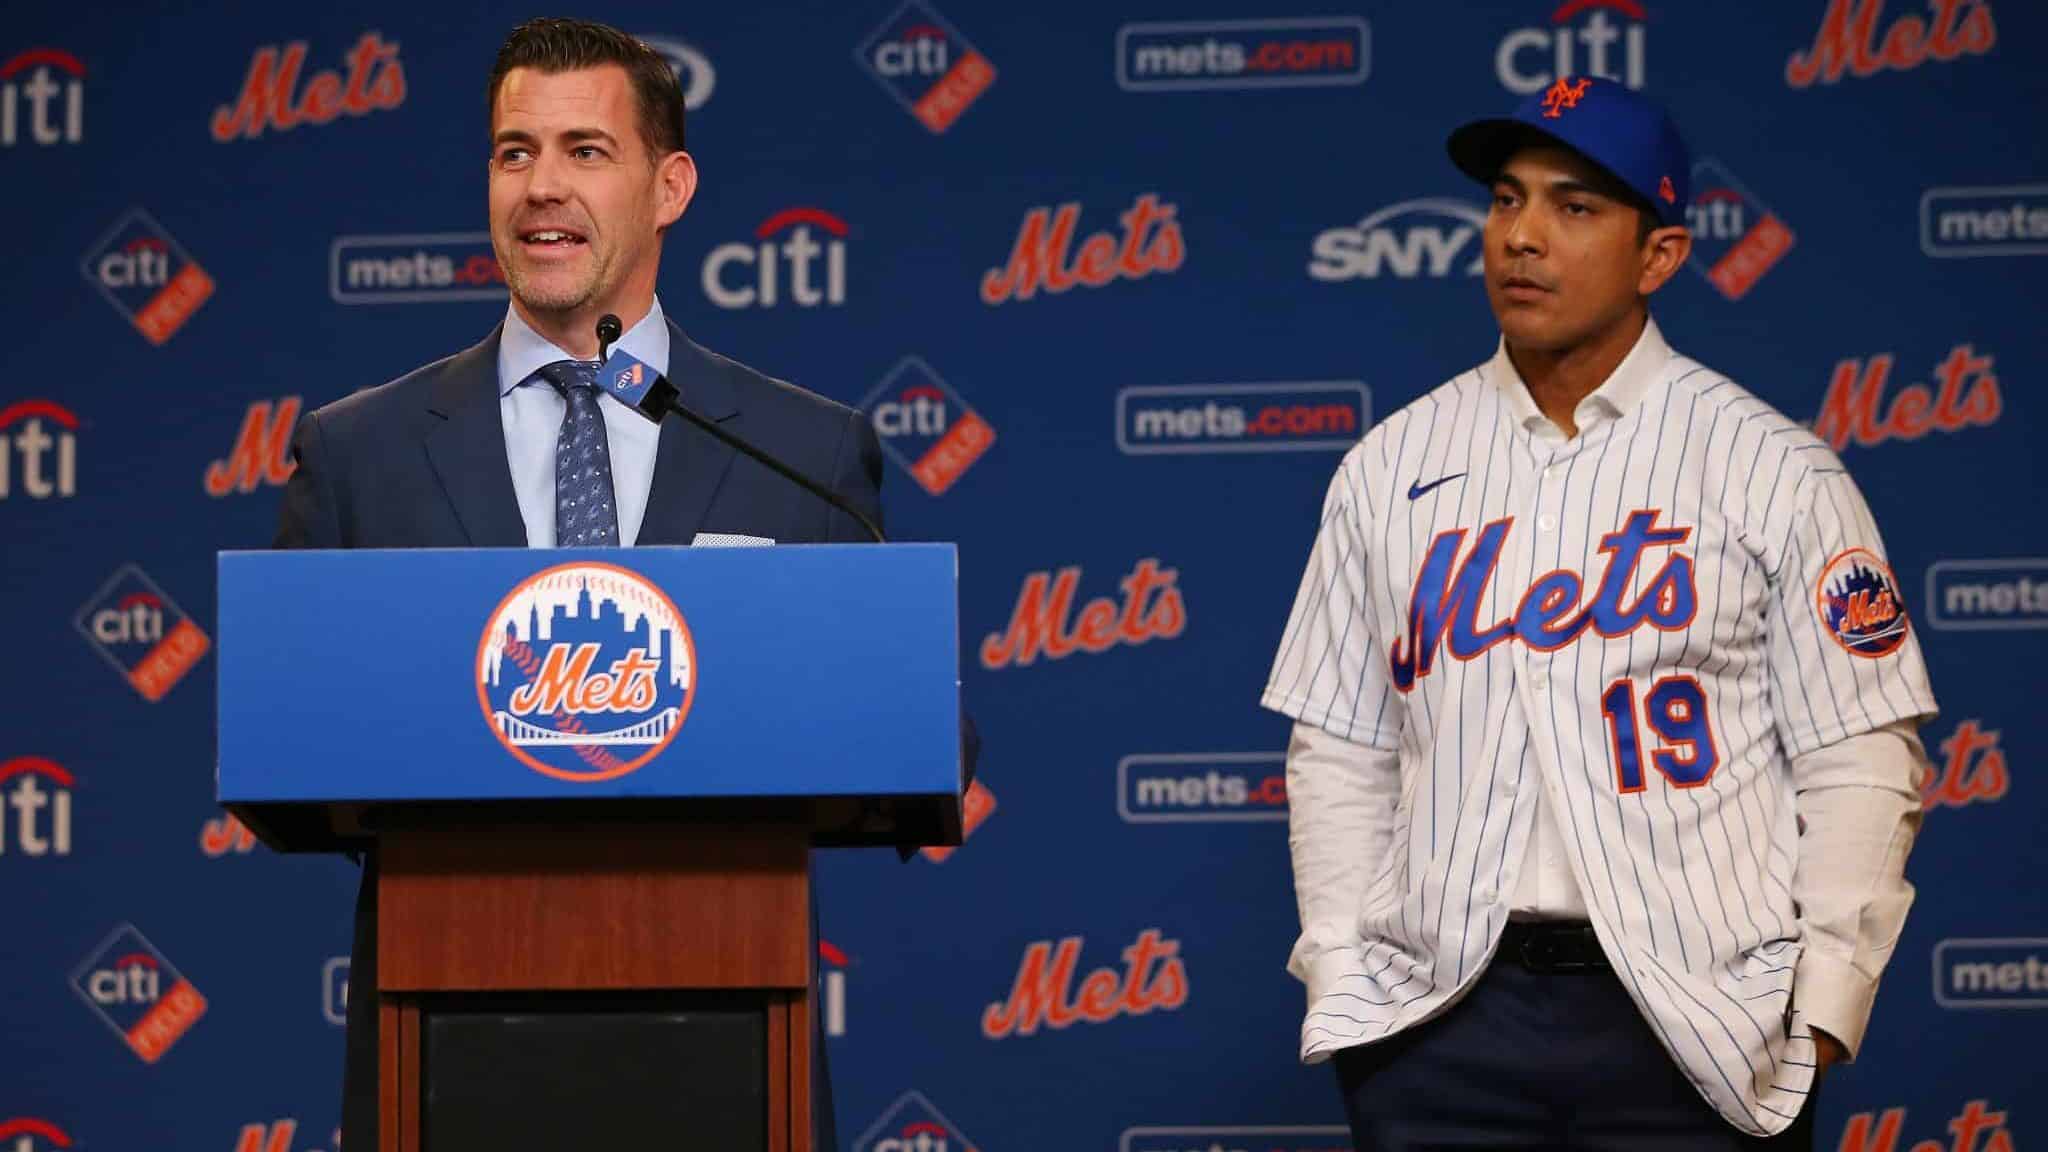 NEW YORK, NY - JANUARY 24: Luis Rojas, right, listens in as New York Mets General Manager Brodie Van Wagenen talks after being introduced as the team's new manager at Citi Field on January 24, 2020 in New York City. Listening in is the team's general manager . Rojas had been the Mets quality control coach and was tapped as a replacement after the newly hired Carlos Beltrán was implicated for his role as a player in 2017 in the Houston Astros sign-stealing scandal.